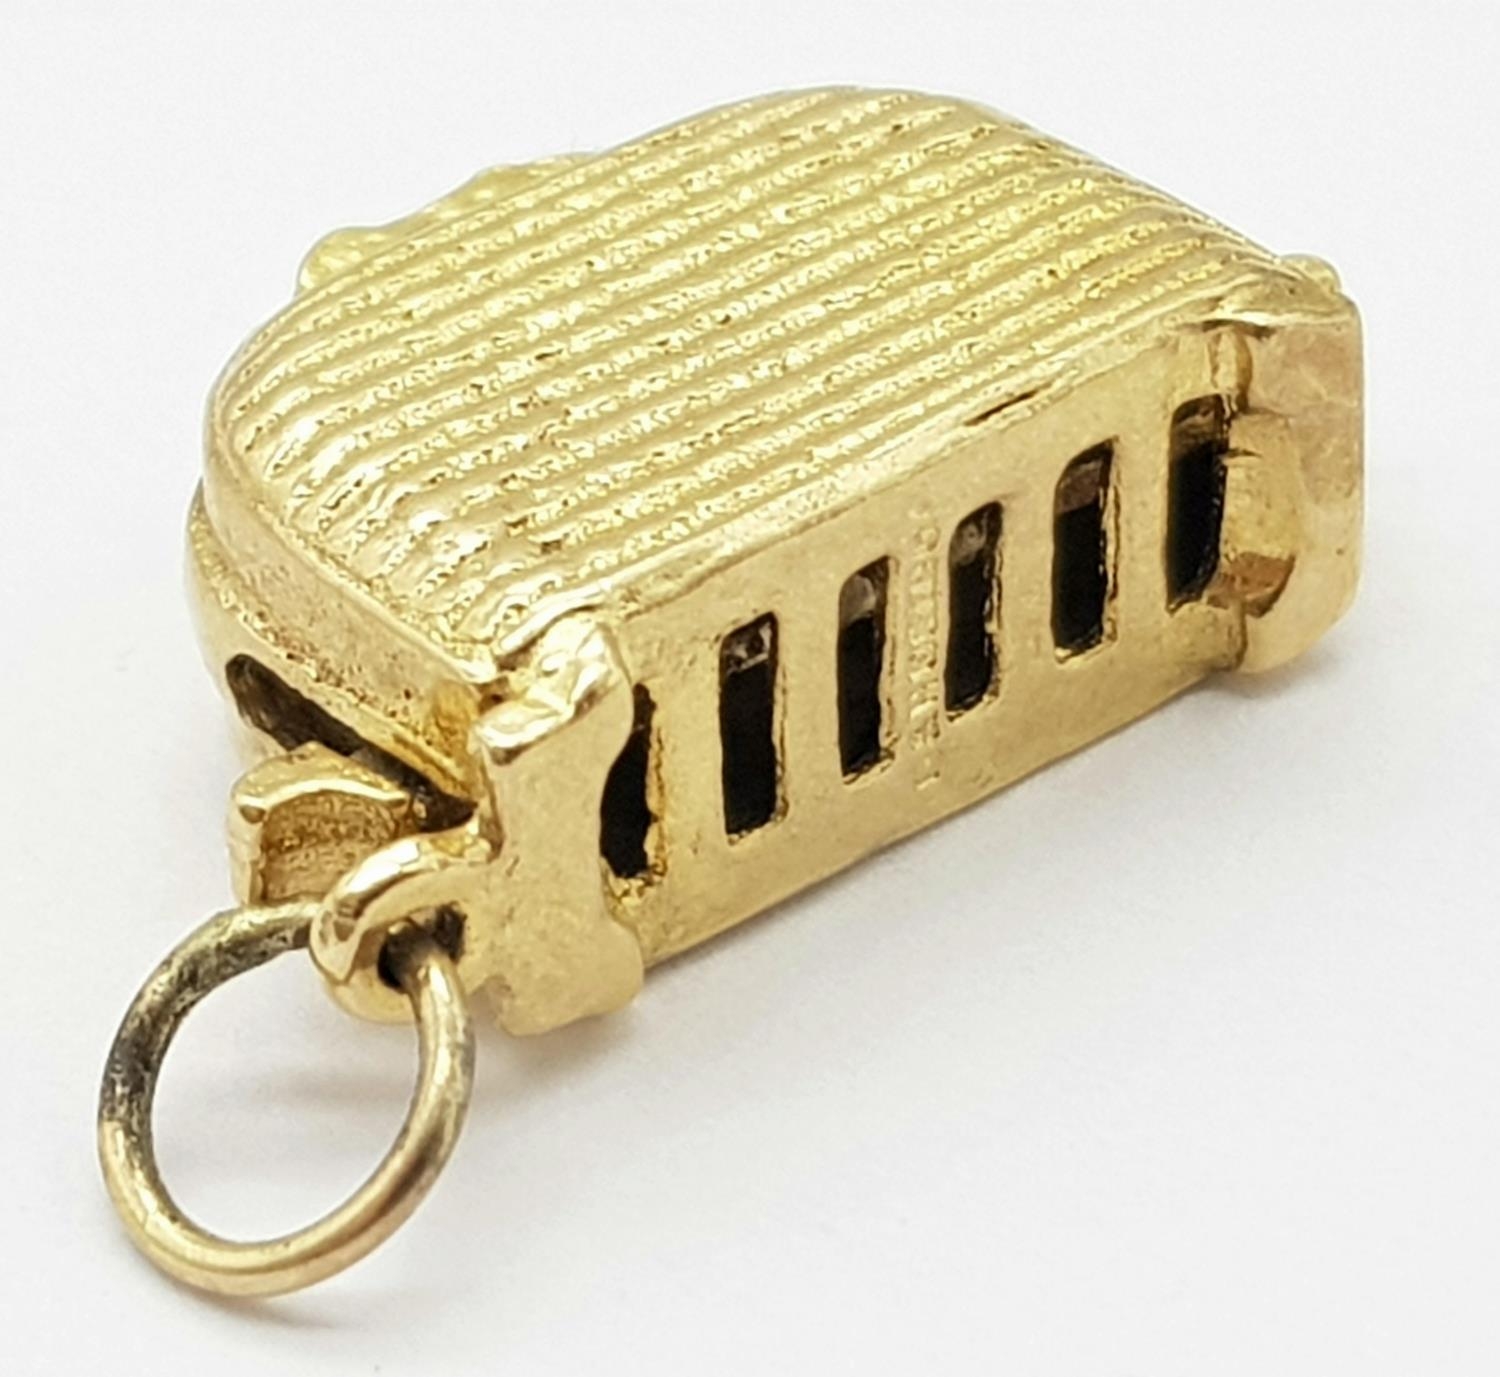 A 9K YELLOW GOLD TOASTER CHARM, WHICH HAS TOAST THAT YOU CAN FLIP OUT VERY CUTE 5.5G , approx 20mm x - Image 3 of 5